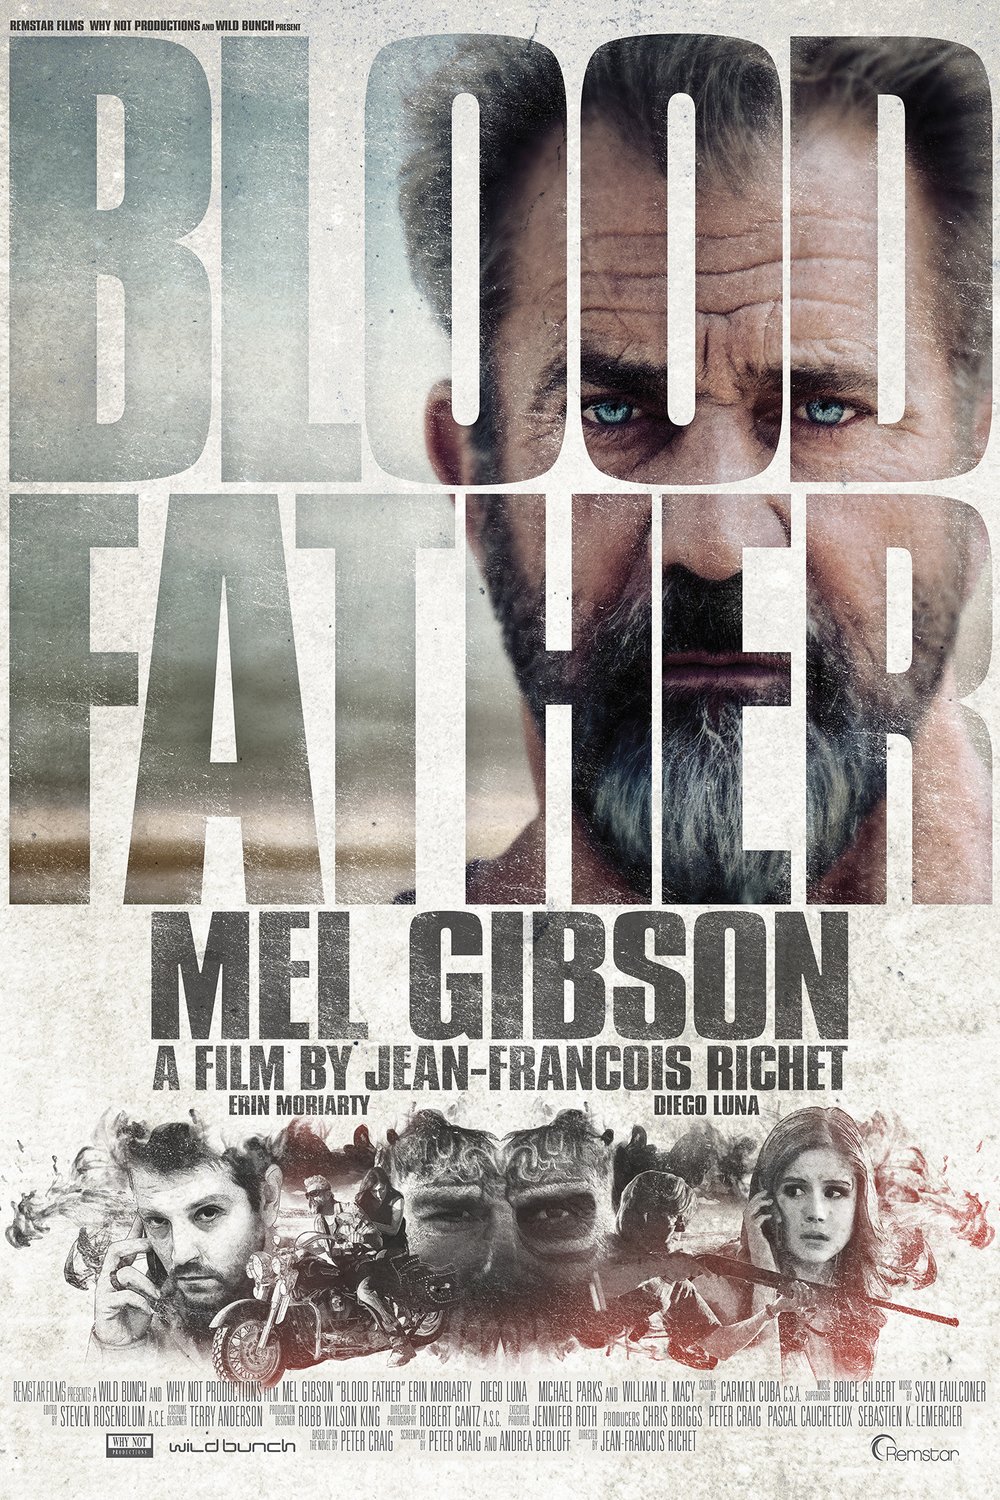 Poster of the movie Blood Father